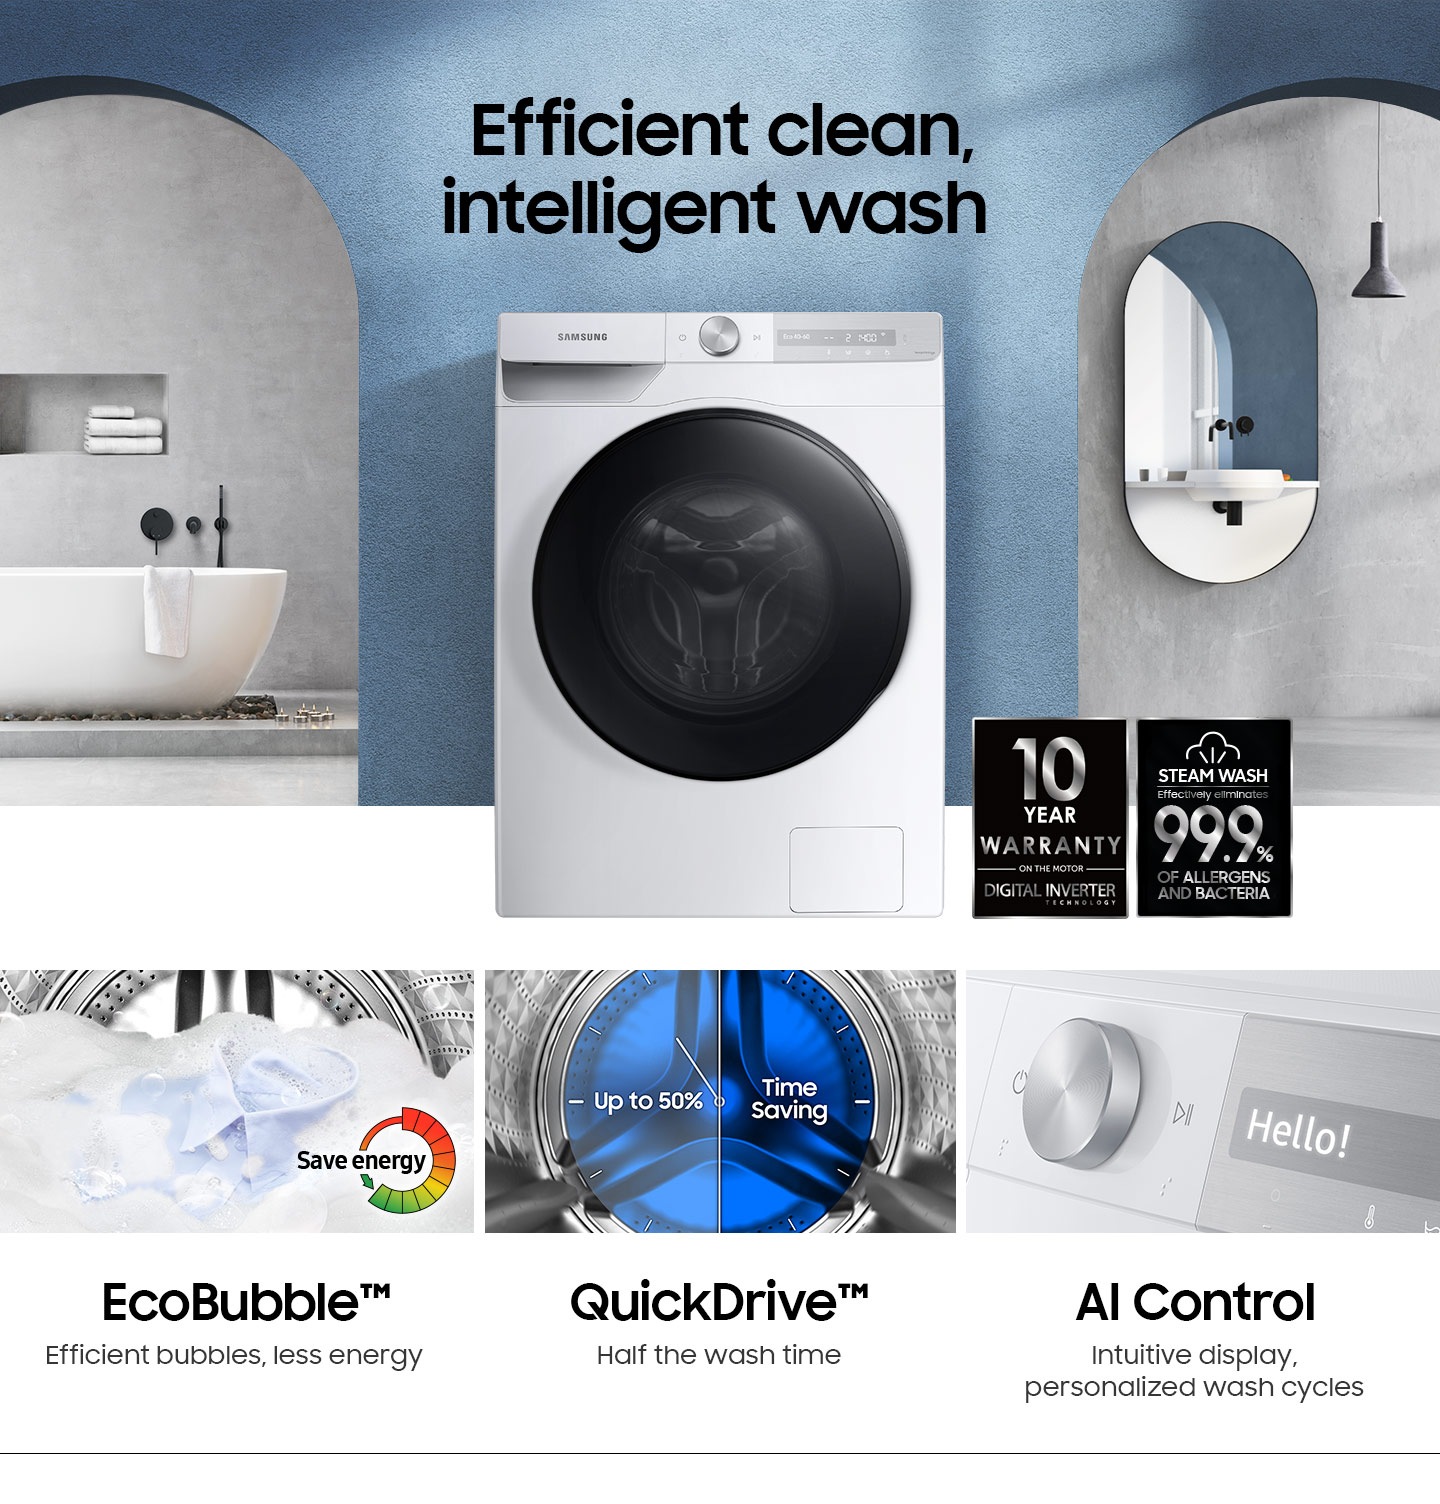 WD7300T is germ-free, and 10-year warranty with EcoBubble, QuickDrive, and AI Control functions.